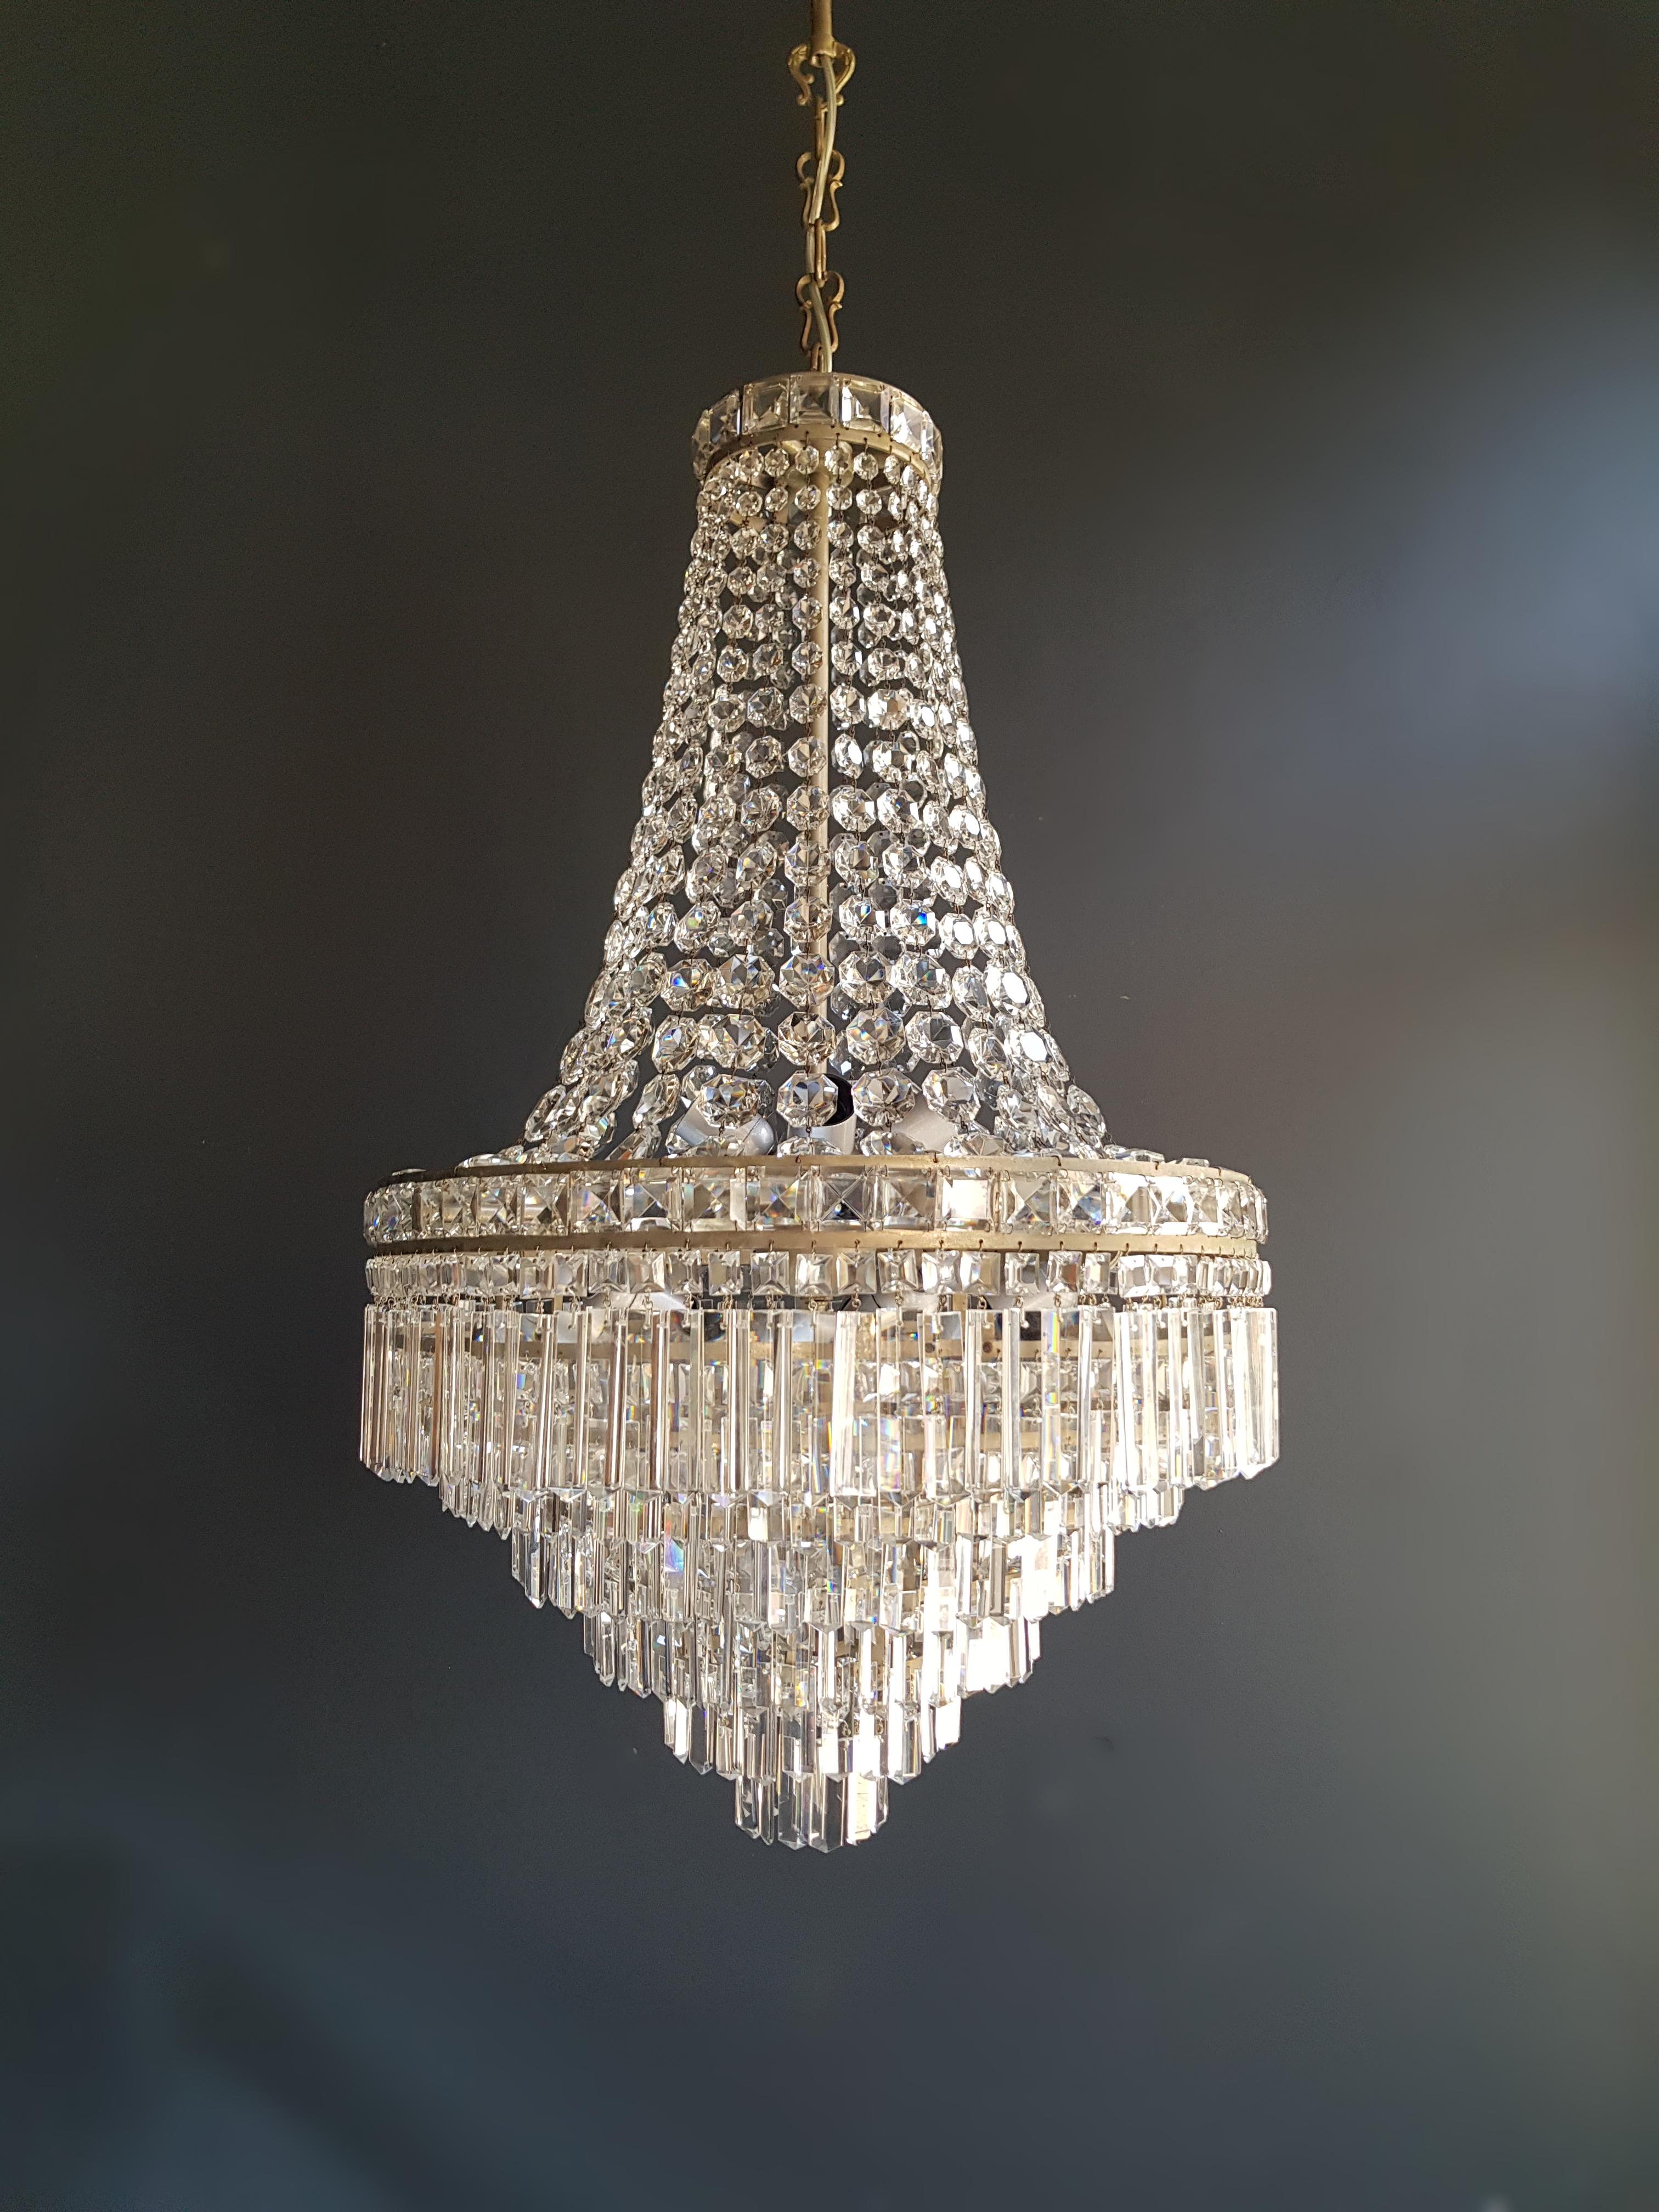 Hand-Knotted Fine Empire Waterfall Chandelier Crystal Sac a Pearl Lamp Lustre Silver Art Deco